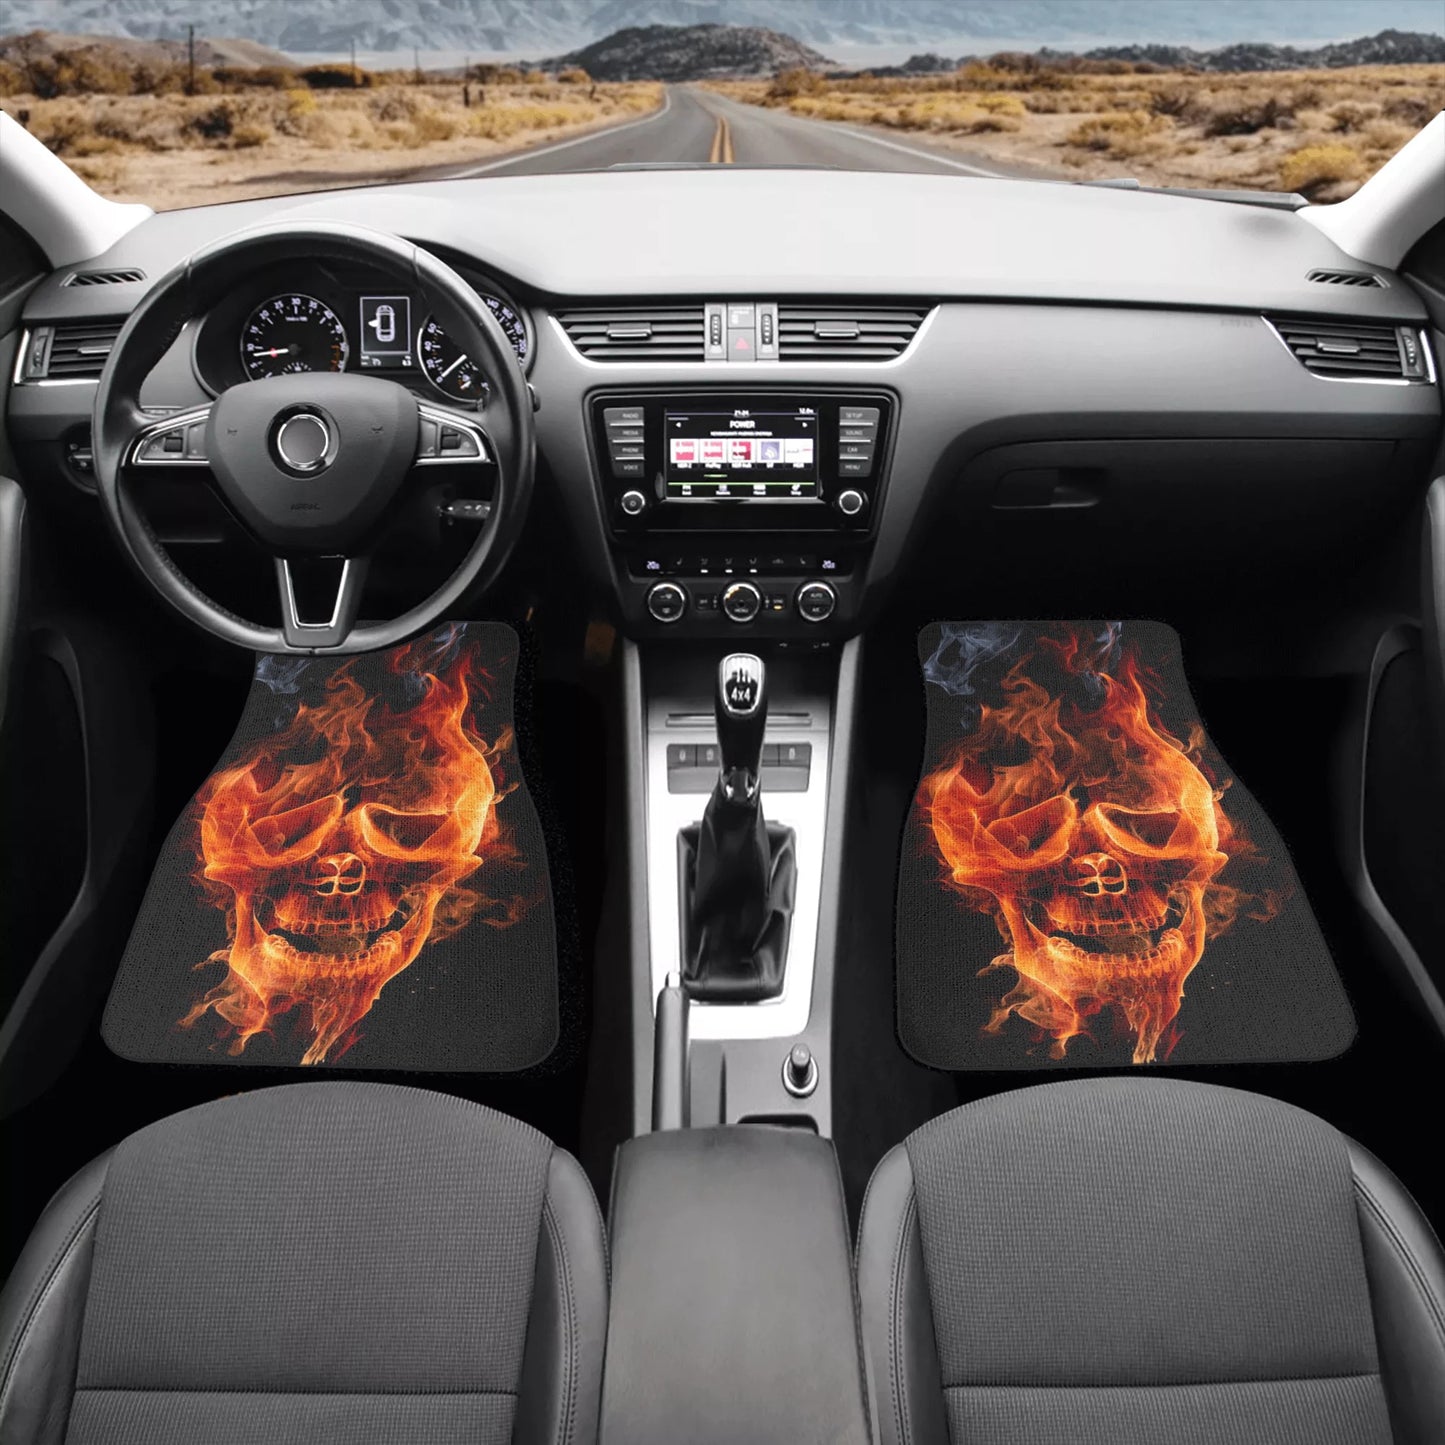 Flaming skull gothic Back and Front Car Floor Mats